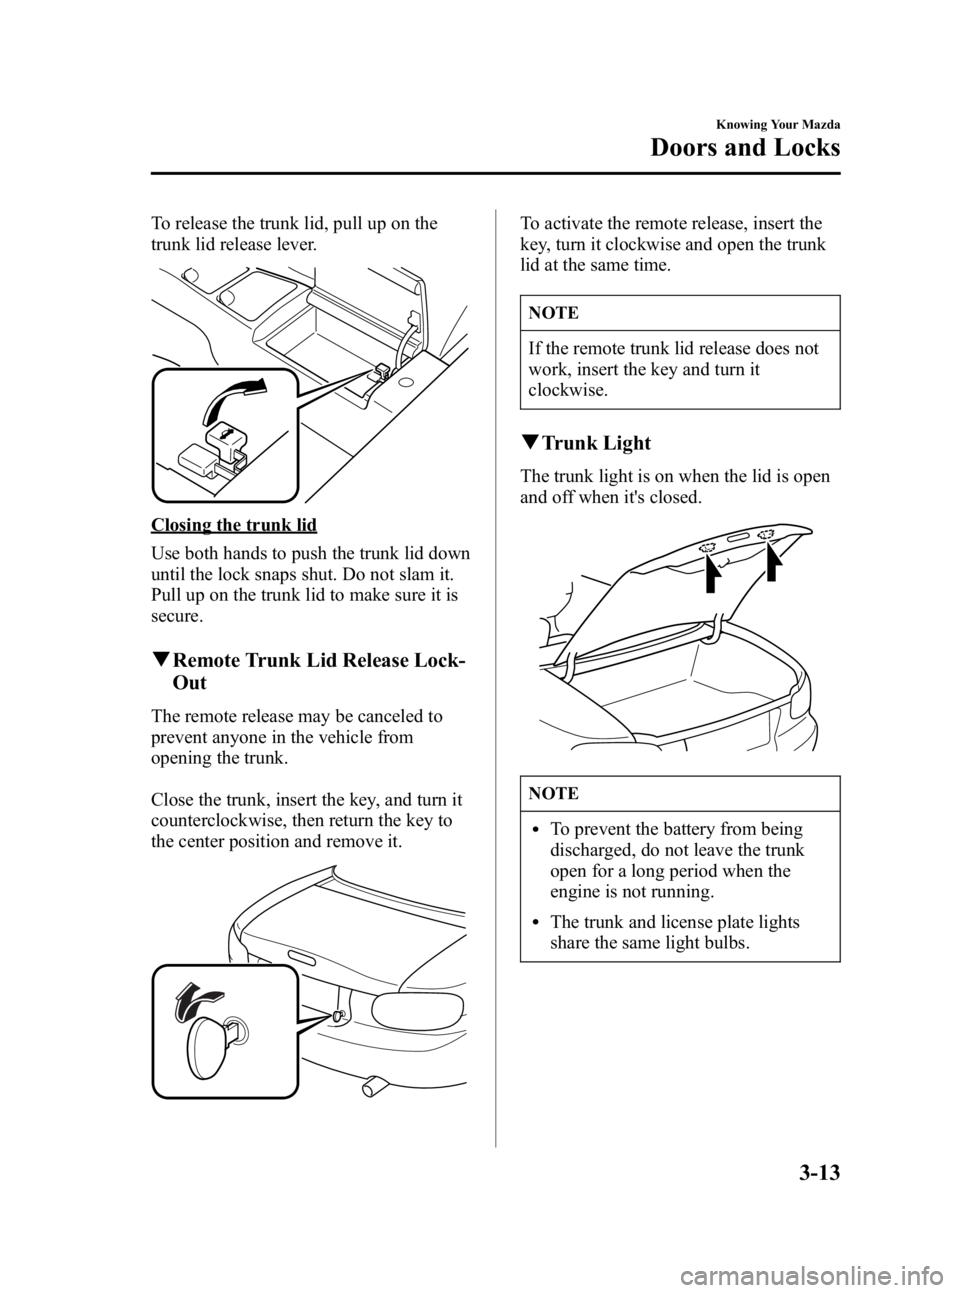 MAZDA MODEL MX-5 MIATA 2005  Owners Manual Black plate (55,1)
To release the trunk lid, pull up on the
trunk lid release lever.
Closing the trunk lid
Use both hands to push the trunk lid down
until the lock snaps shut. Do not slam it.
Pull up 